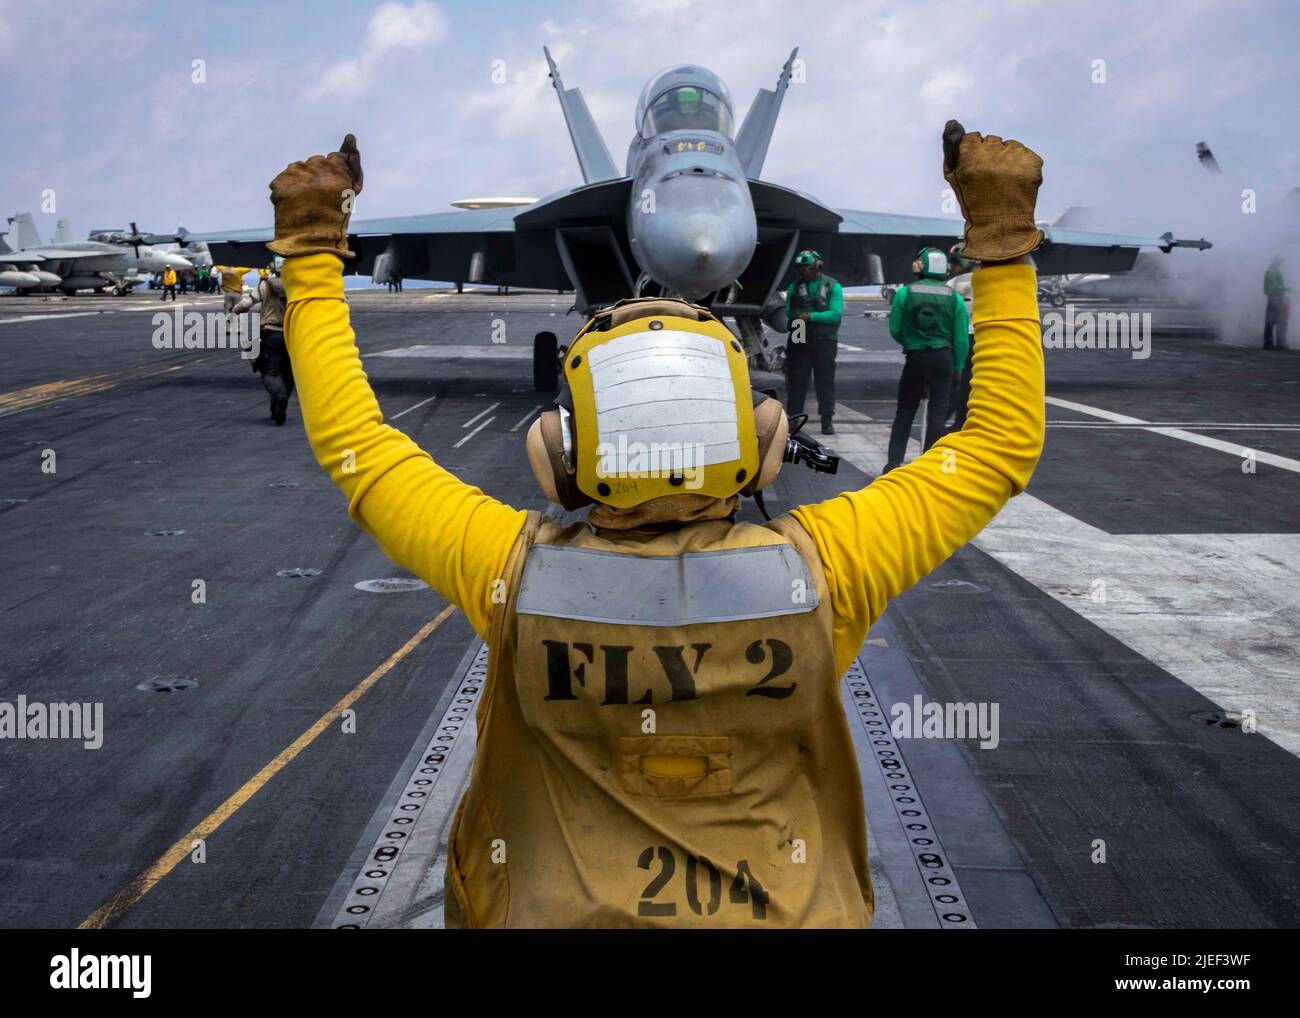 220624-N-OL632-1233 ATLANTIC OCEAN (June 24, 2022) Aviation Boatswain’s Mate (Handling) 2nd Class Kayla Fowler, signals an F/A-18E Super Hornet aircraft attached to Strike Fighter Squadron (VFA) 143, on the flight deck of the Nimitz-class aircraft carrier USS George H.W. Bush (CVN 77), June 24, 2022. The George H.W. Bush Carrier Strike Group (CSG) is underway completing a certification exercise to increase U.S. and allied interoperability and warfighting capability before a future deployment. The George H.W. Bush CSG is an integrated combat weapons system that delivers superior combat capabili Stock Photo